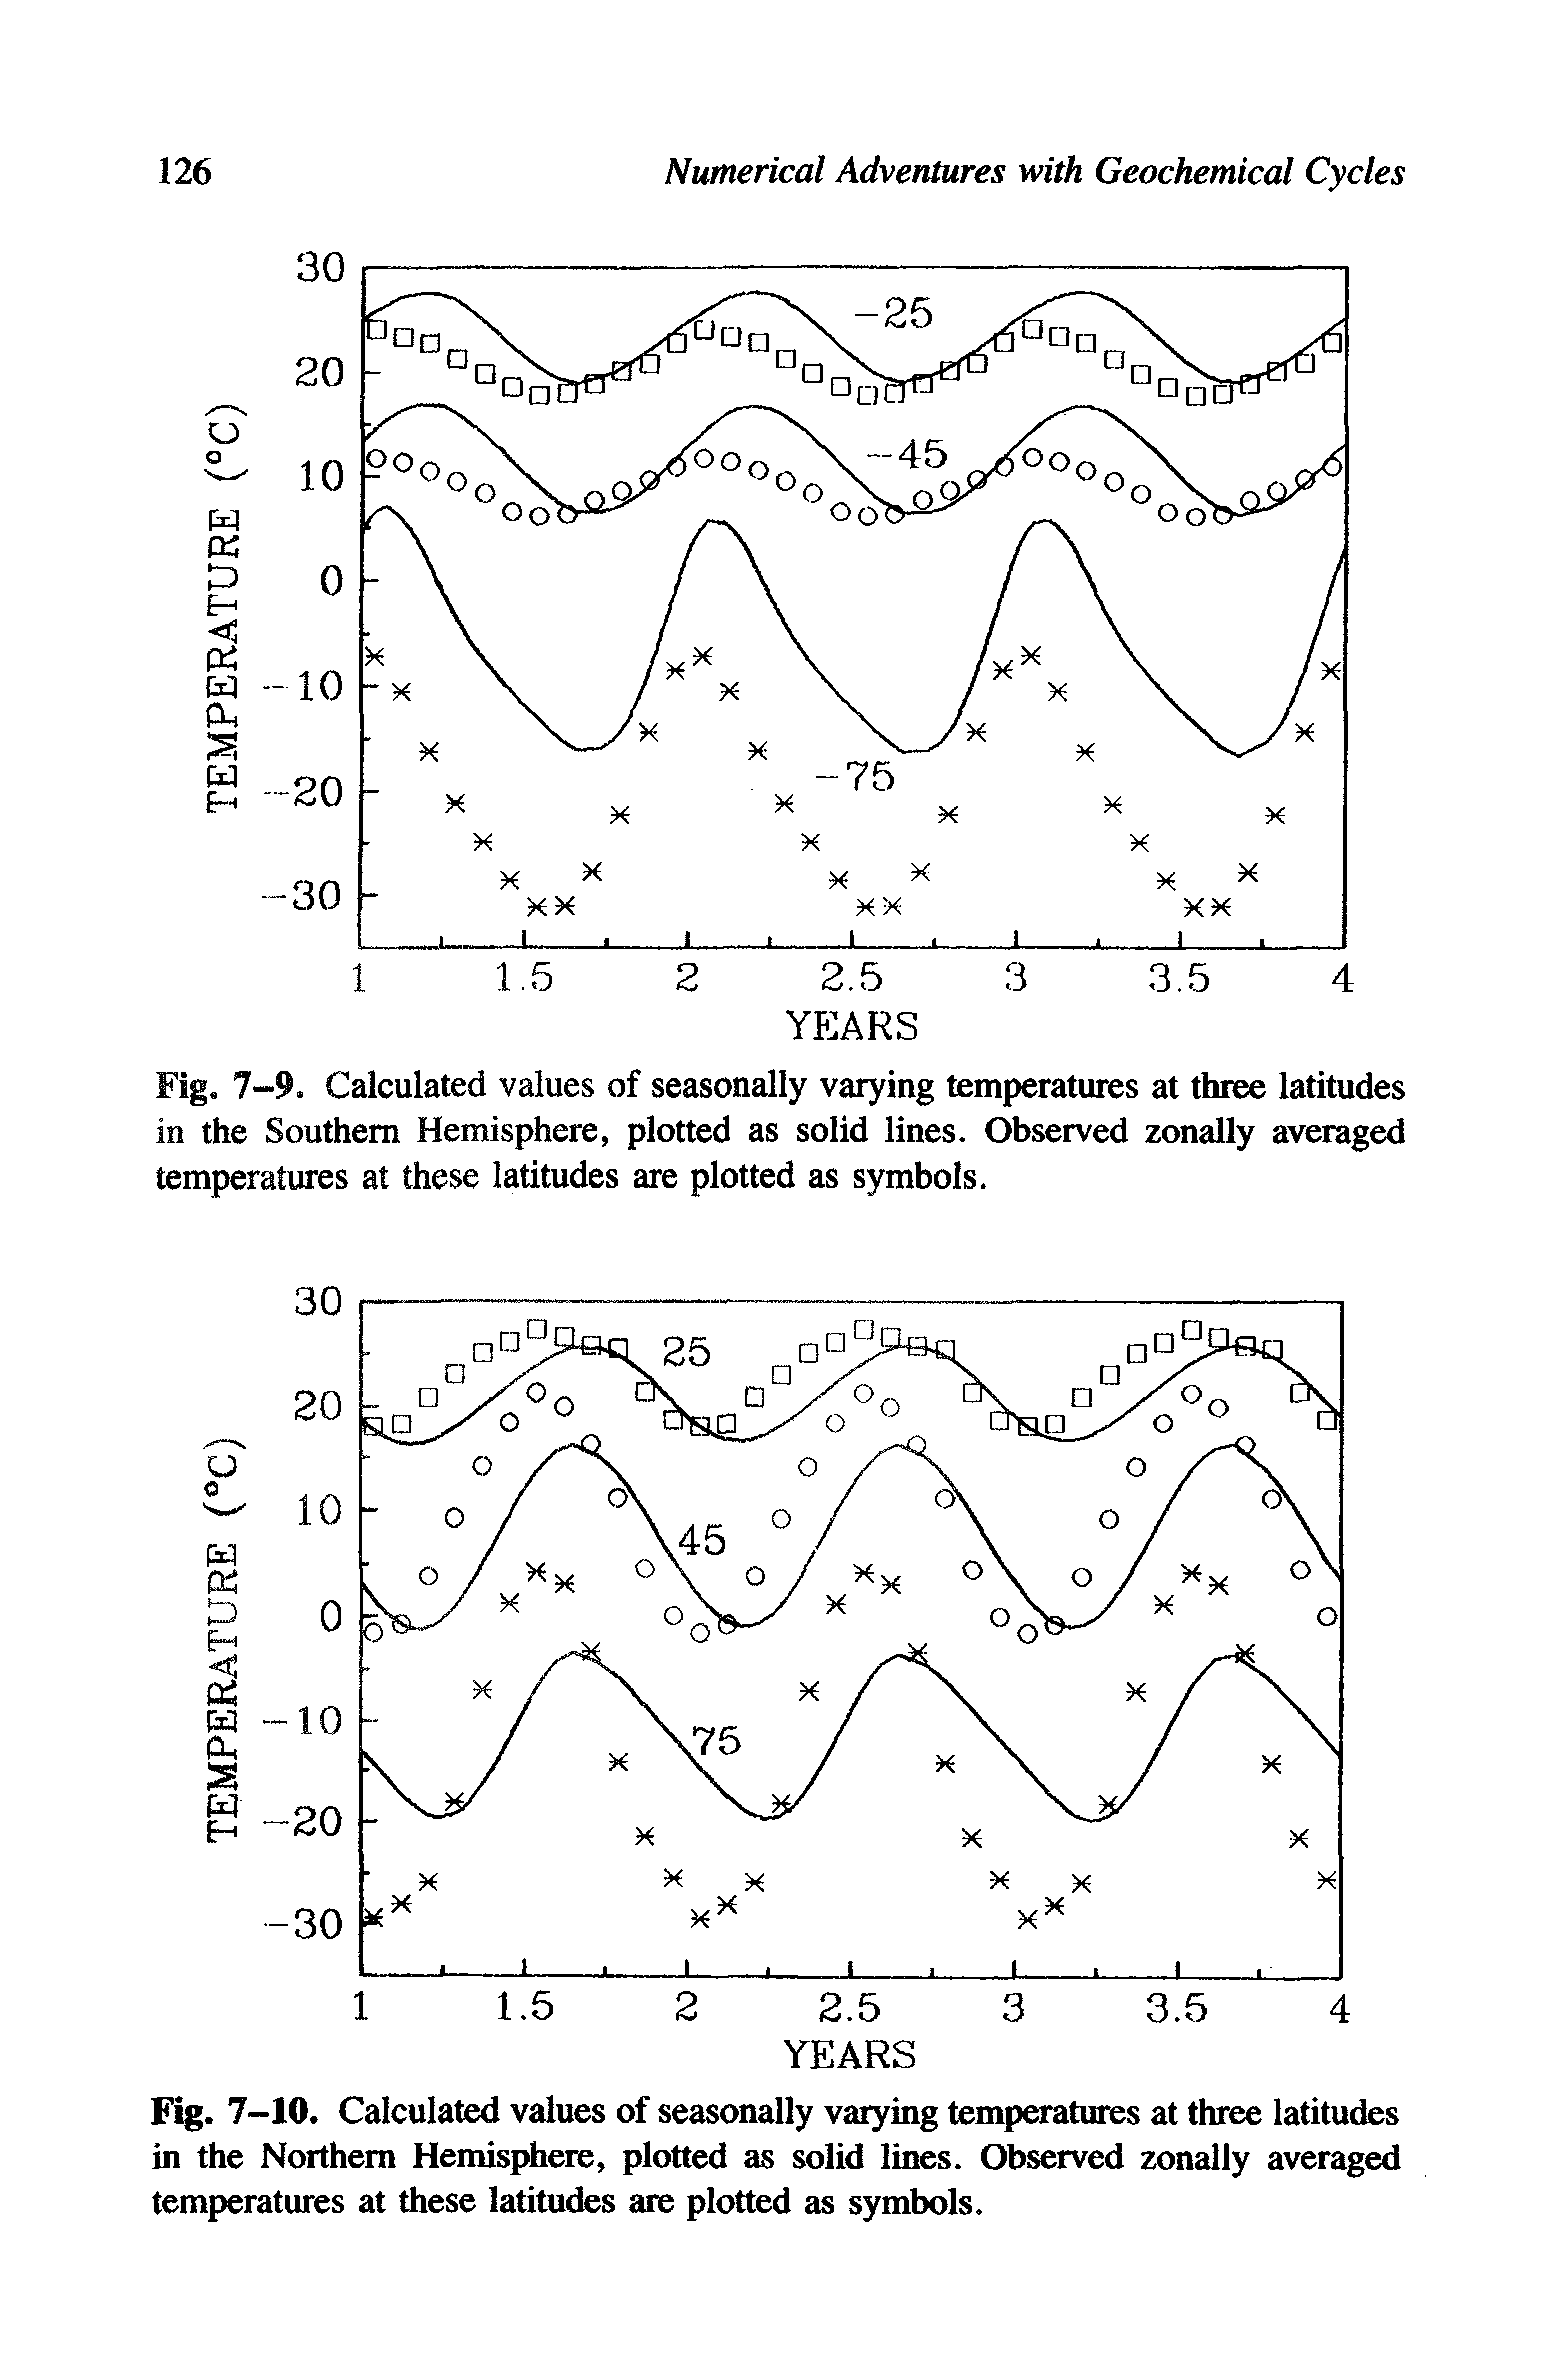 Fig. 7-10. Calculated values of seasonally varying temperatures at three latitudes in the Northern Hemisphere, plotted as solid lines. Observed zonally averaged temperatures at these latitudes are plotted as symbols.